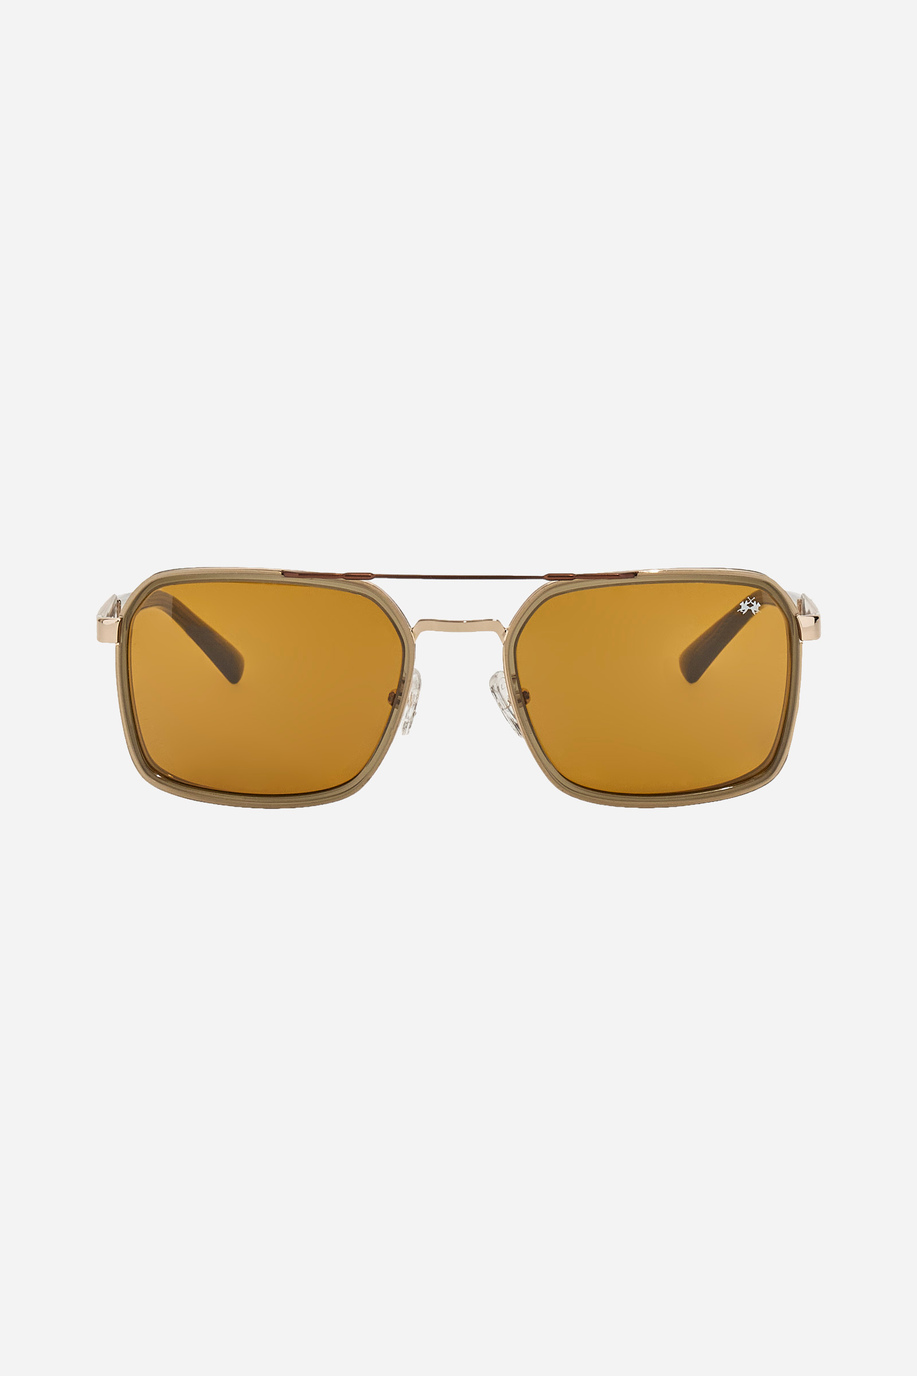 Trapeze sunglasses - Small gifts for him | La Martina - Official Online Shop